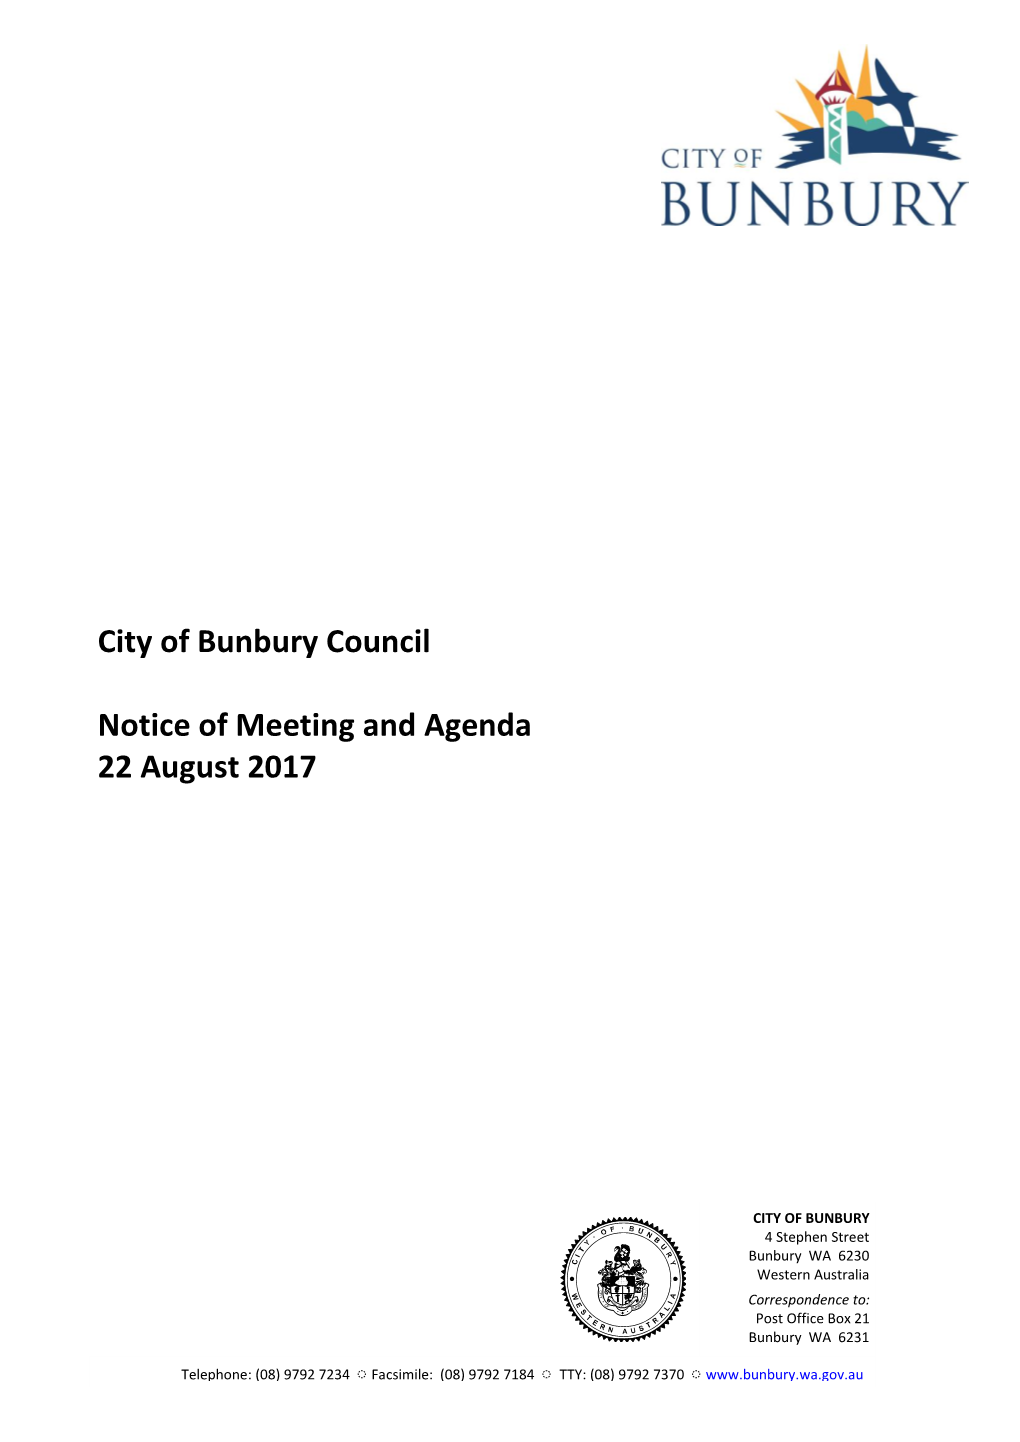 City of Bunbury Council Notice of Meeting and Agenda 22 August 2017